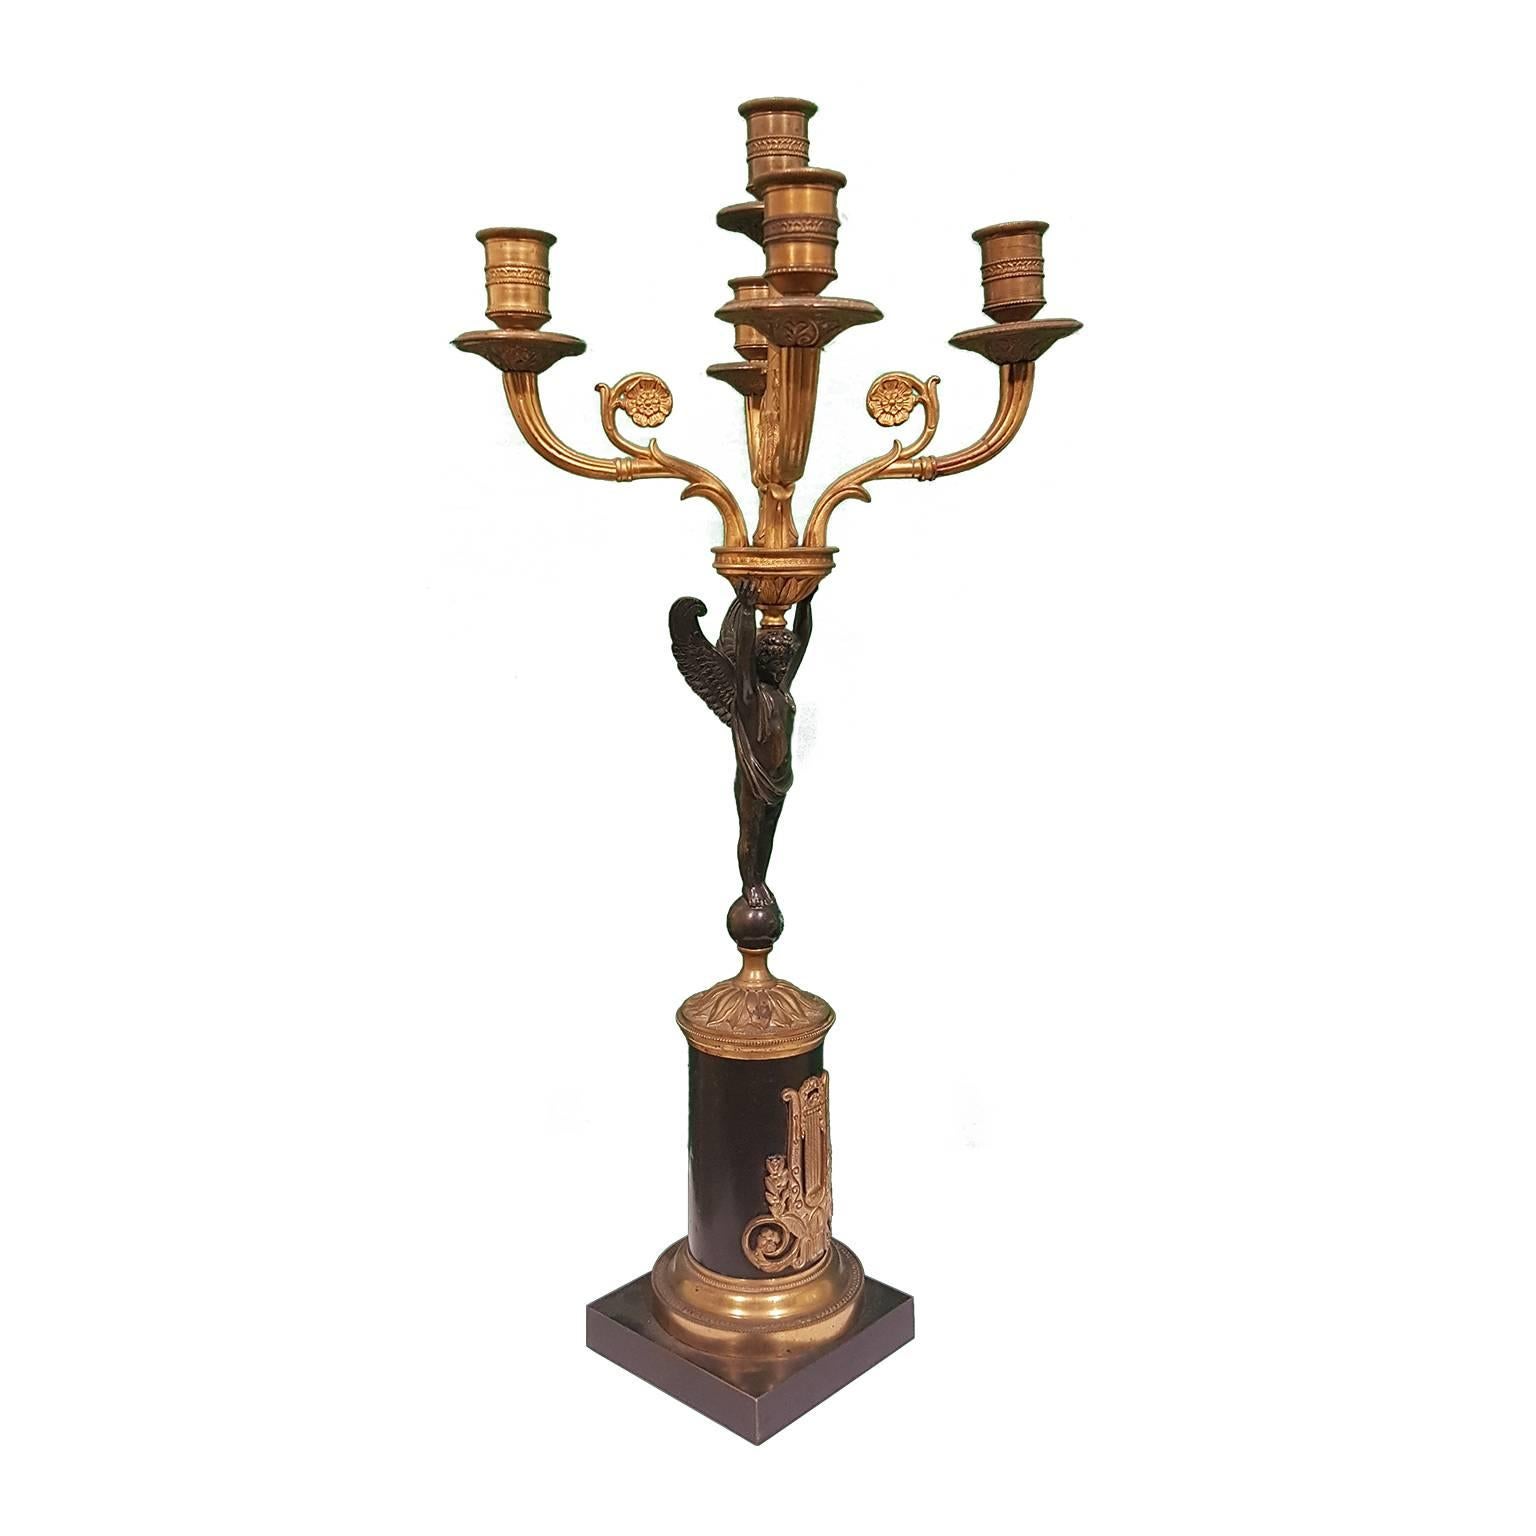 Pair of 19th century bronze candleholders with beautiful angel details, featuring five lights, in gilt bronze. They present two angels from which issue five large and beautifully modelled rose branches terminating with candle holders. The angels